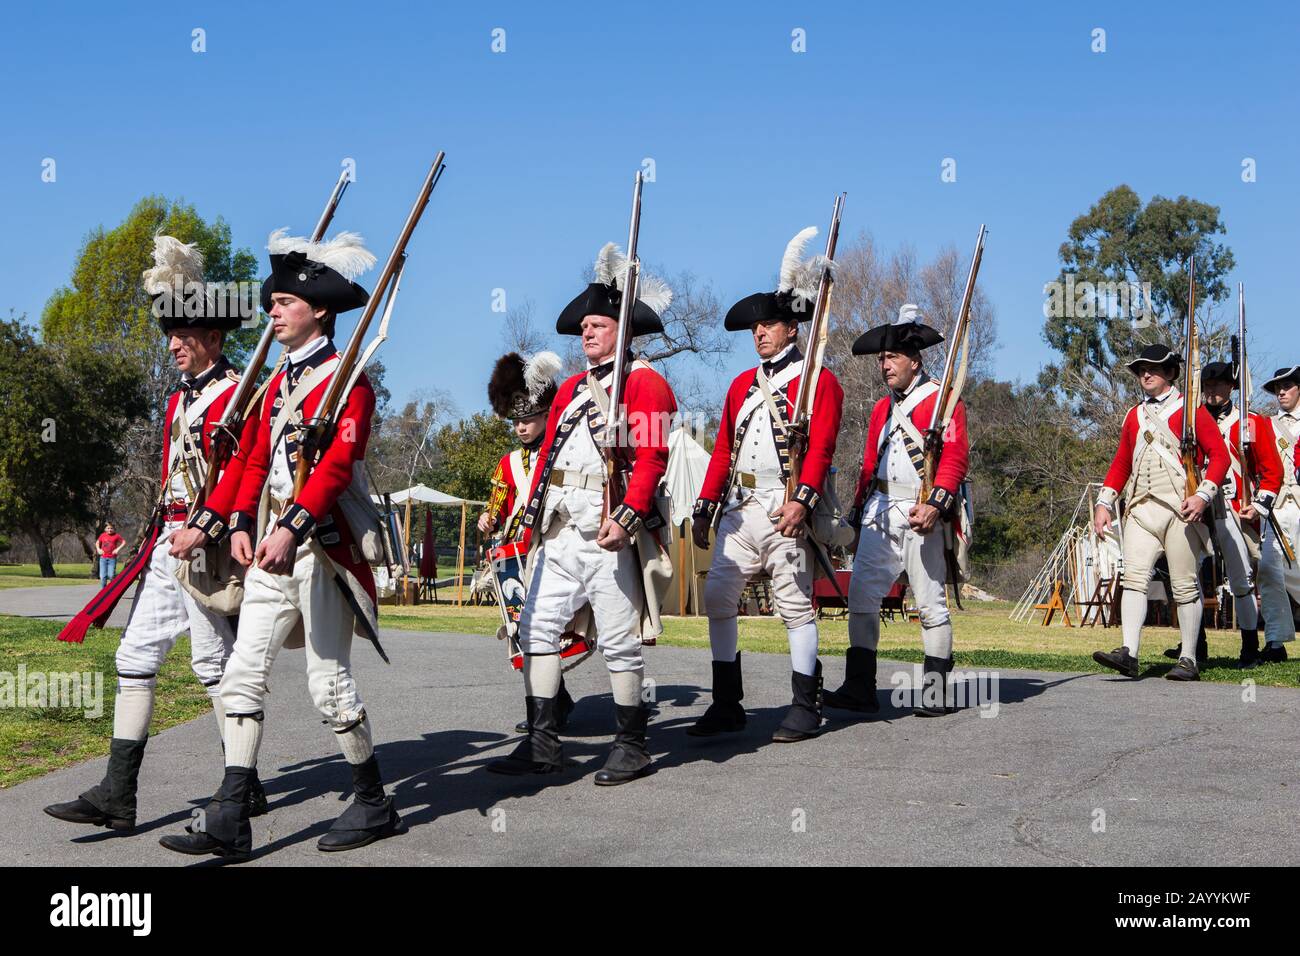 British Redcoat Uniform High Resolution Stock Photography and Images - Alamy